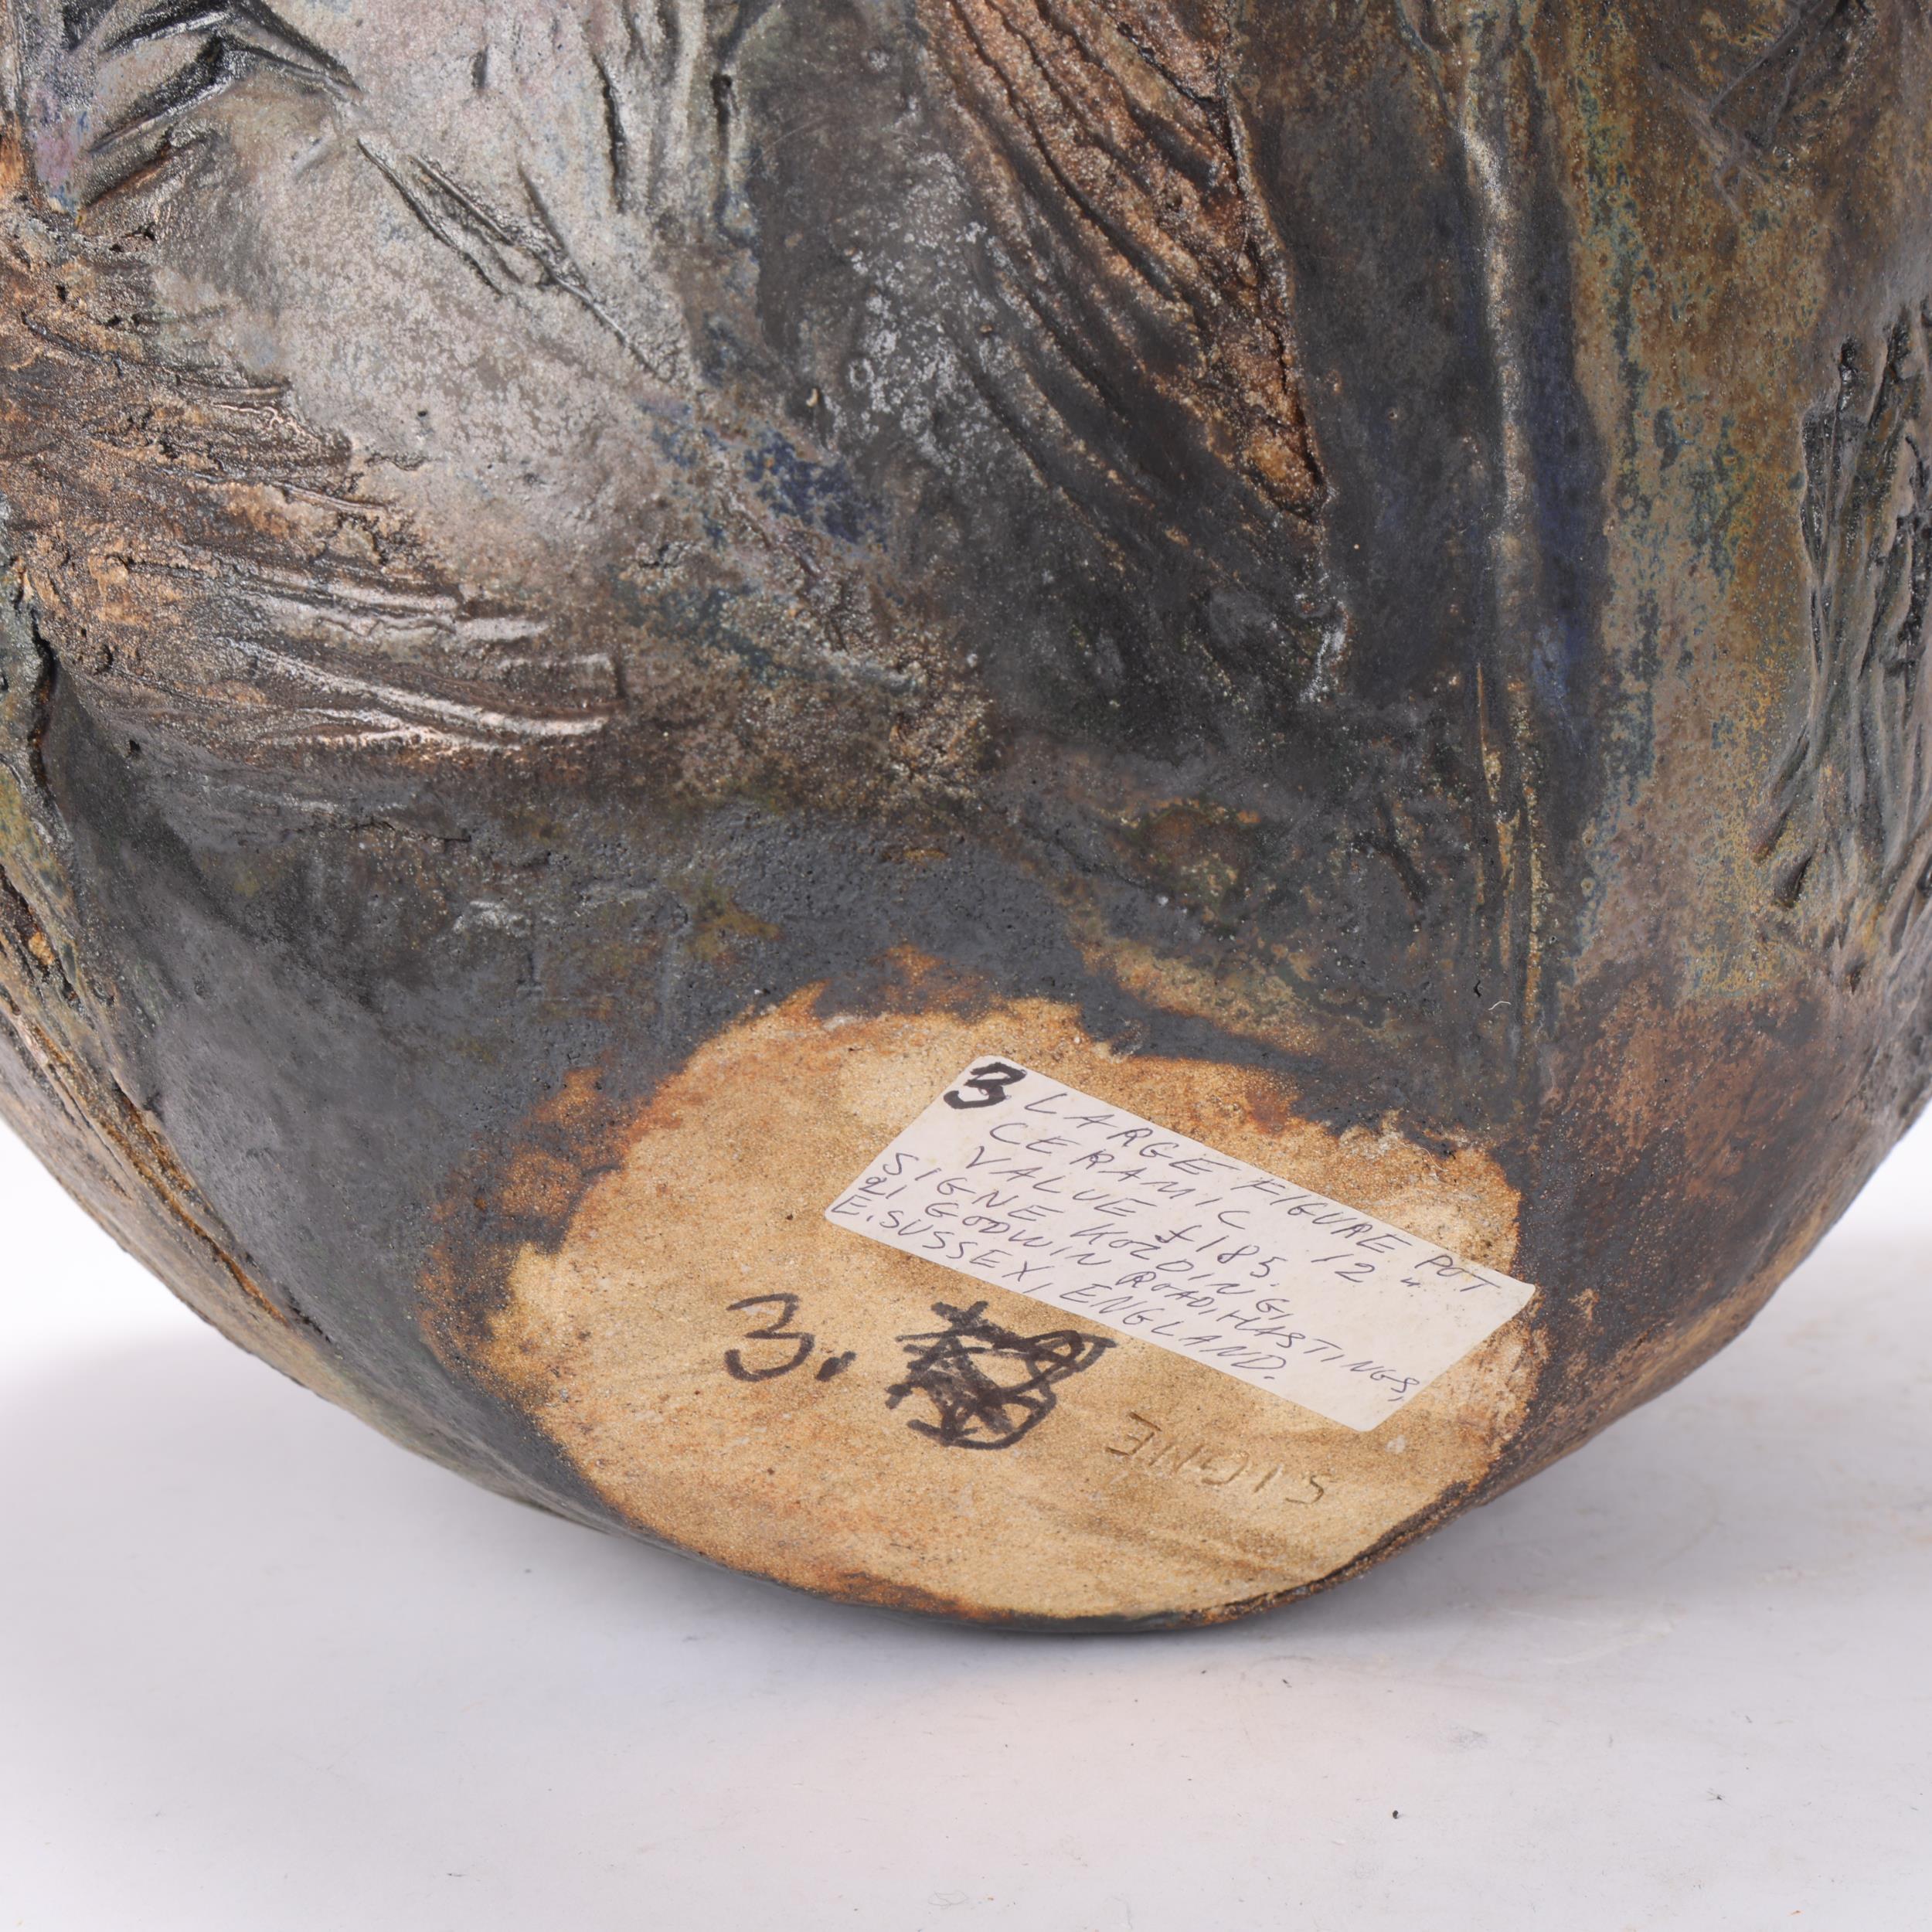 SIGNE KOLDING, Danish, a large hand built sculptural bowl with figural relief decoration, signed - Image 3 of 3